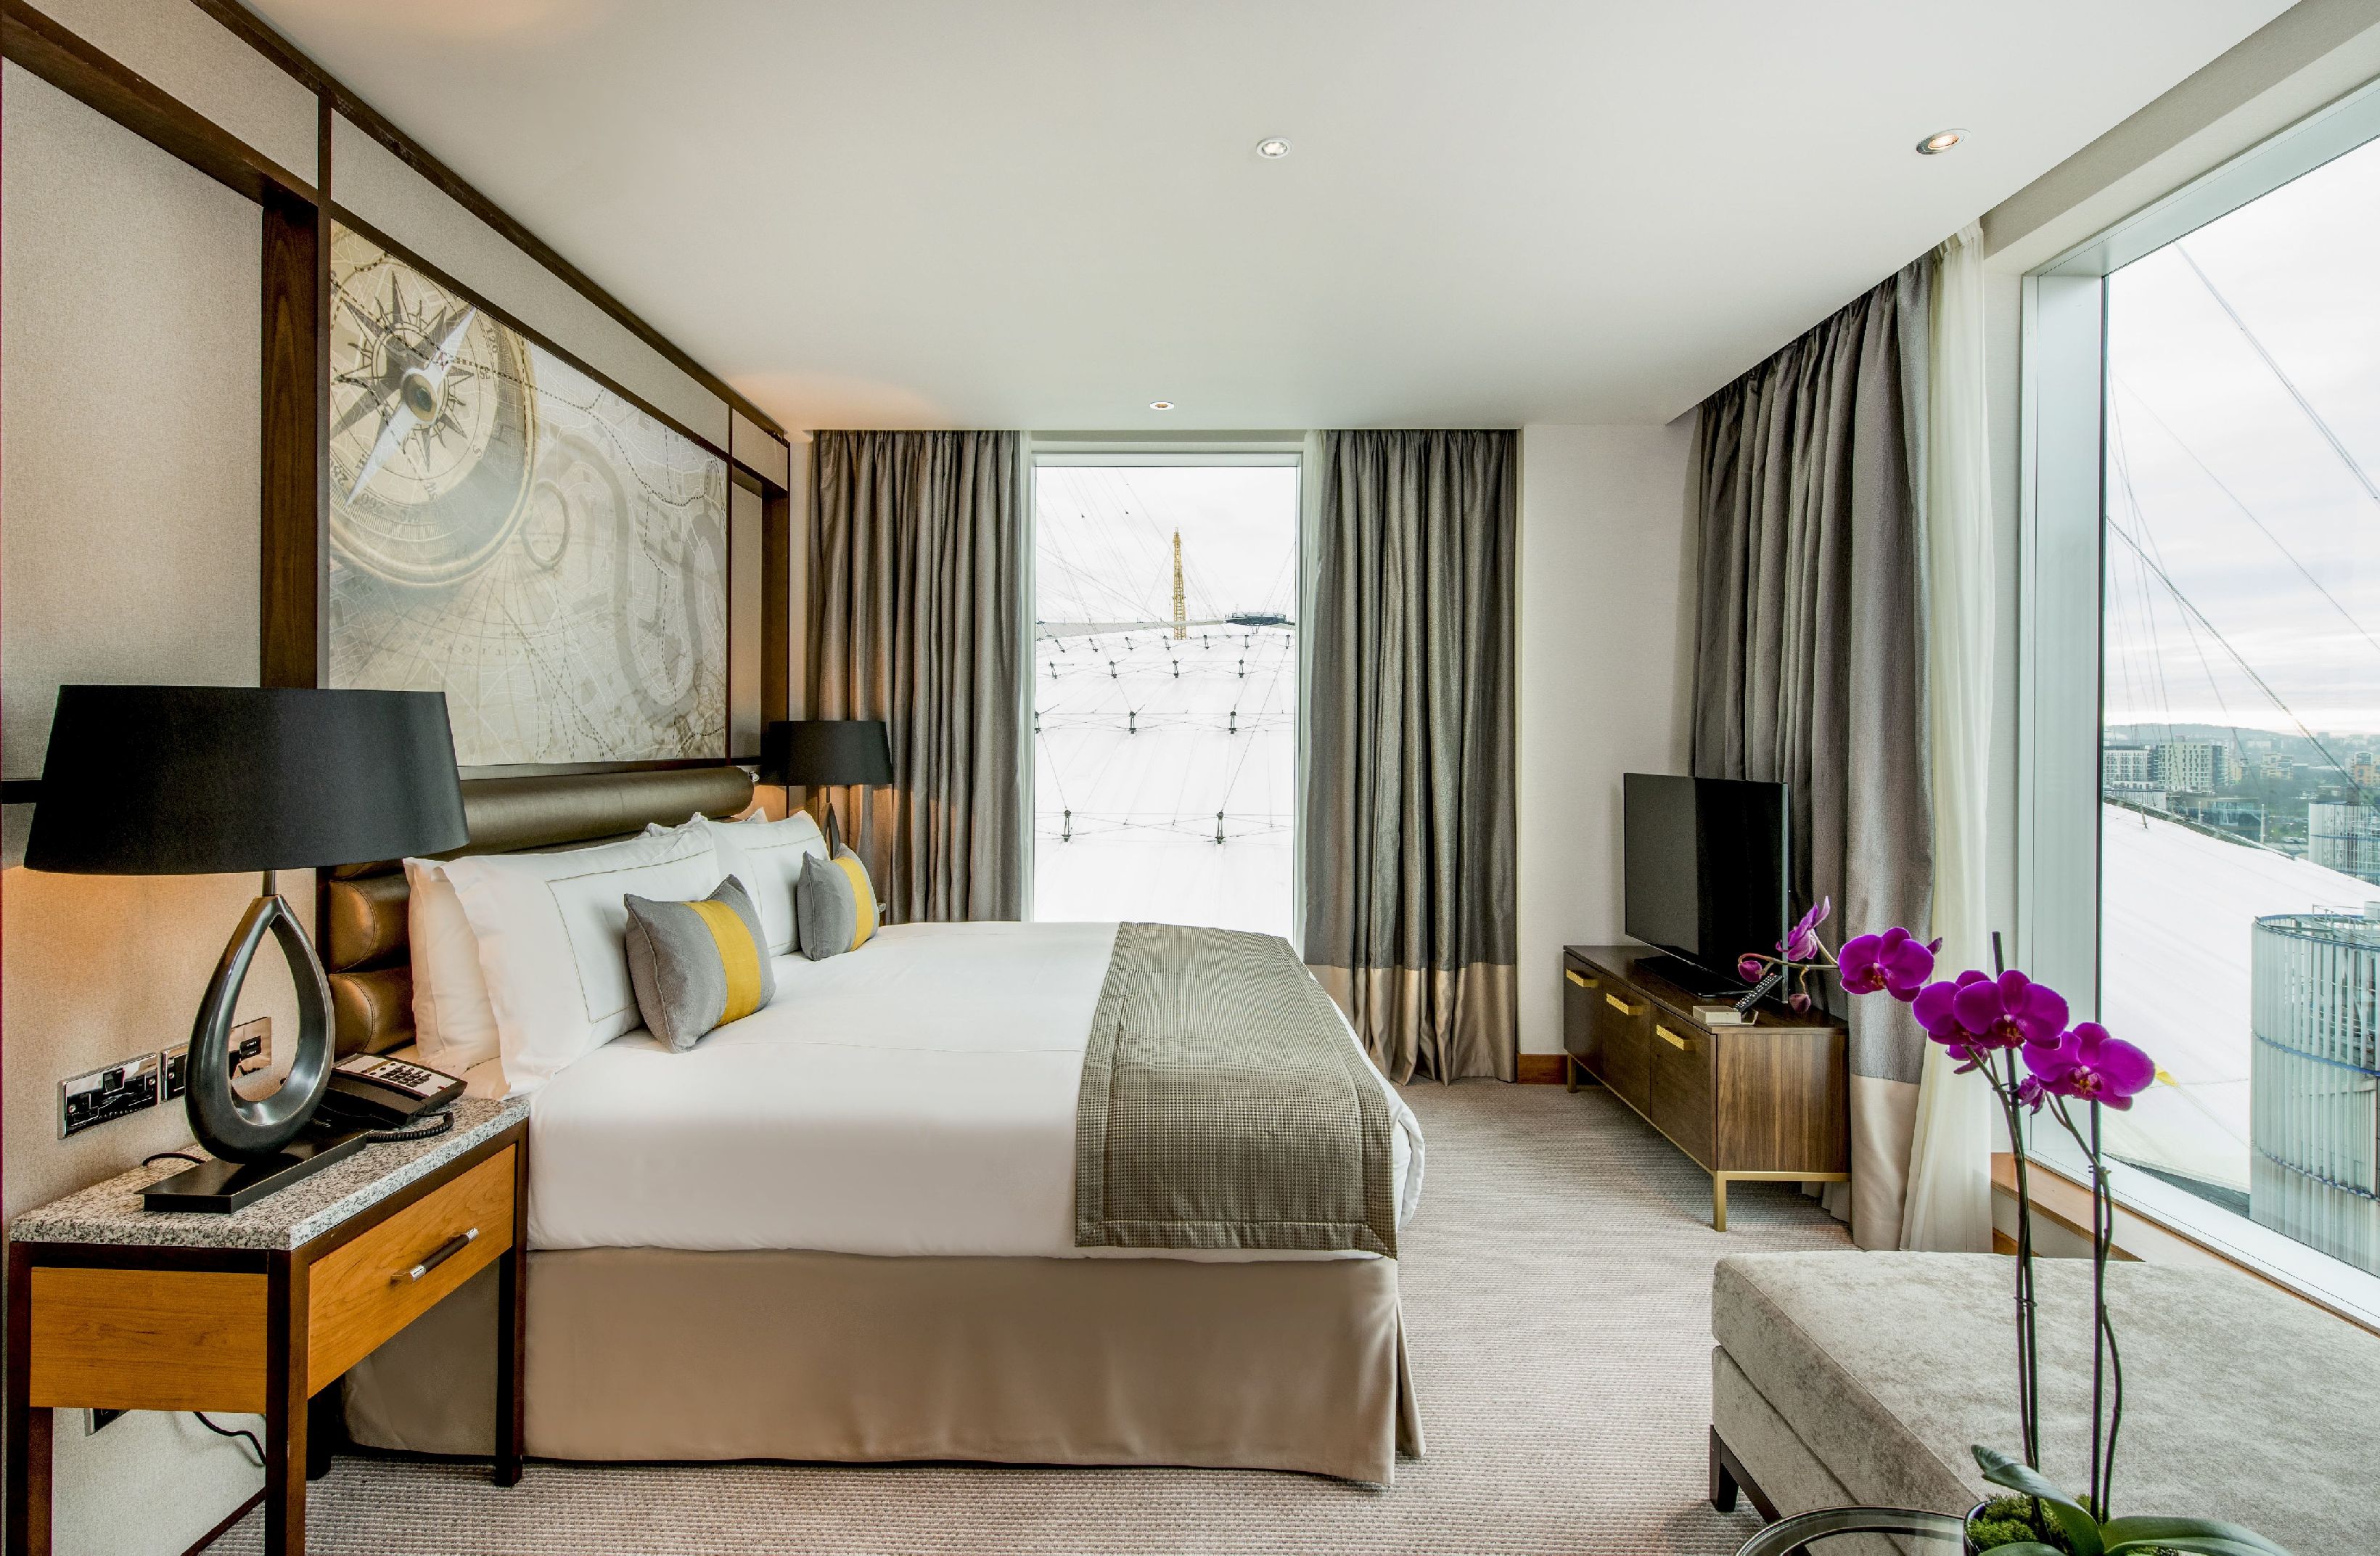 Image: The Fine Bedding Company Hospitality Division supply bedding to InterContinental London - The O2 Bedroom, London